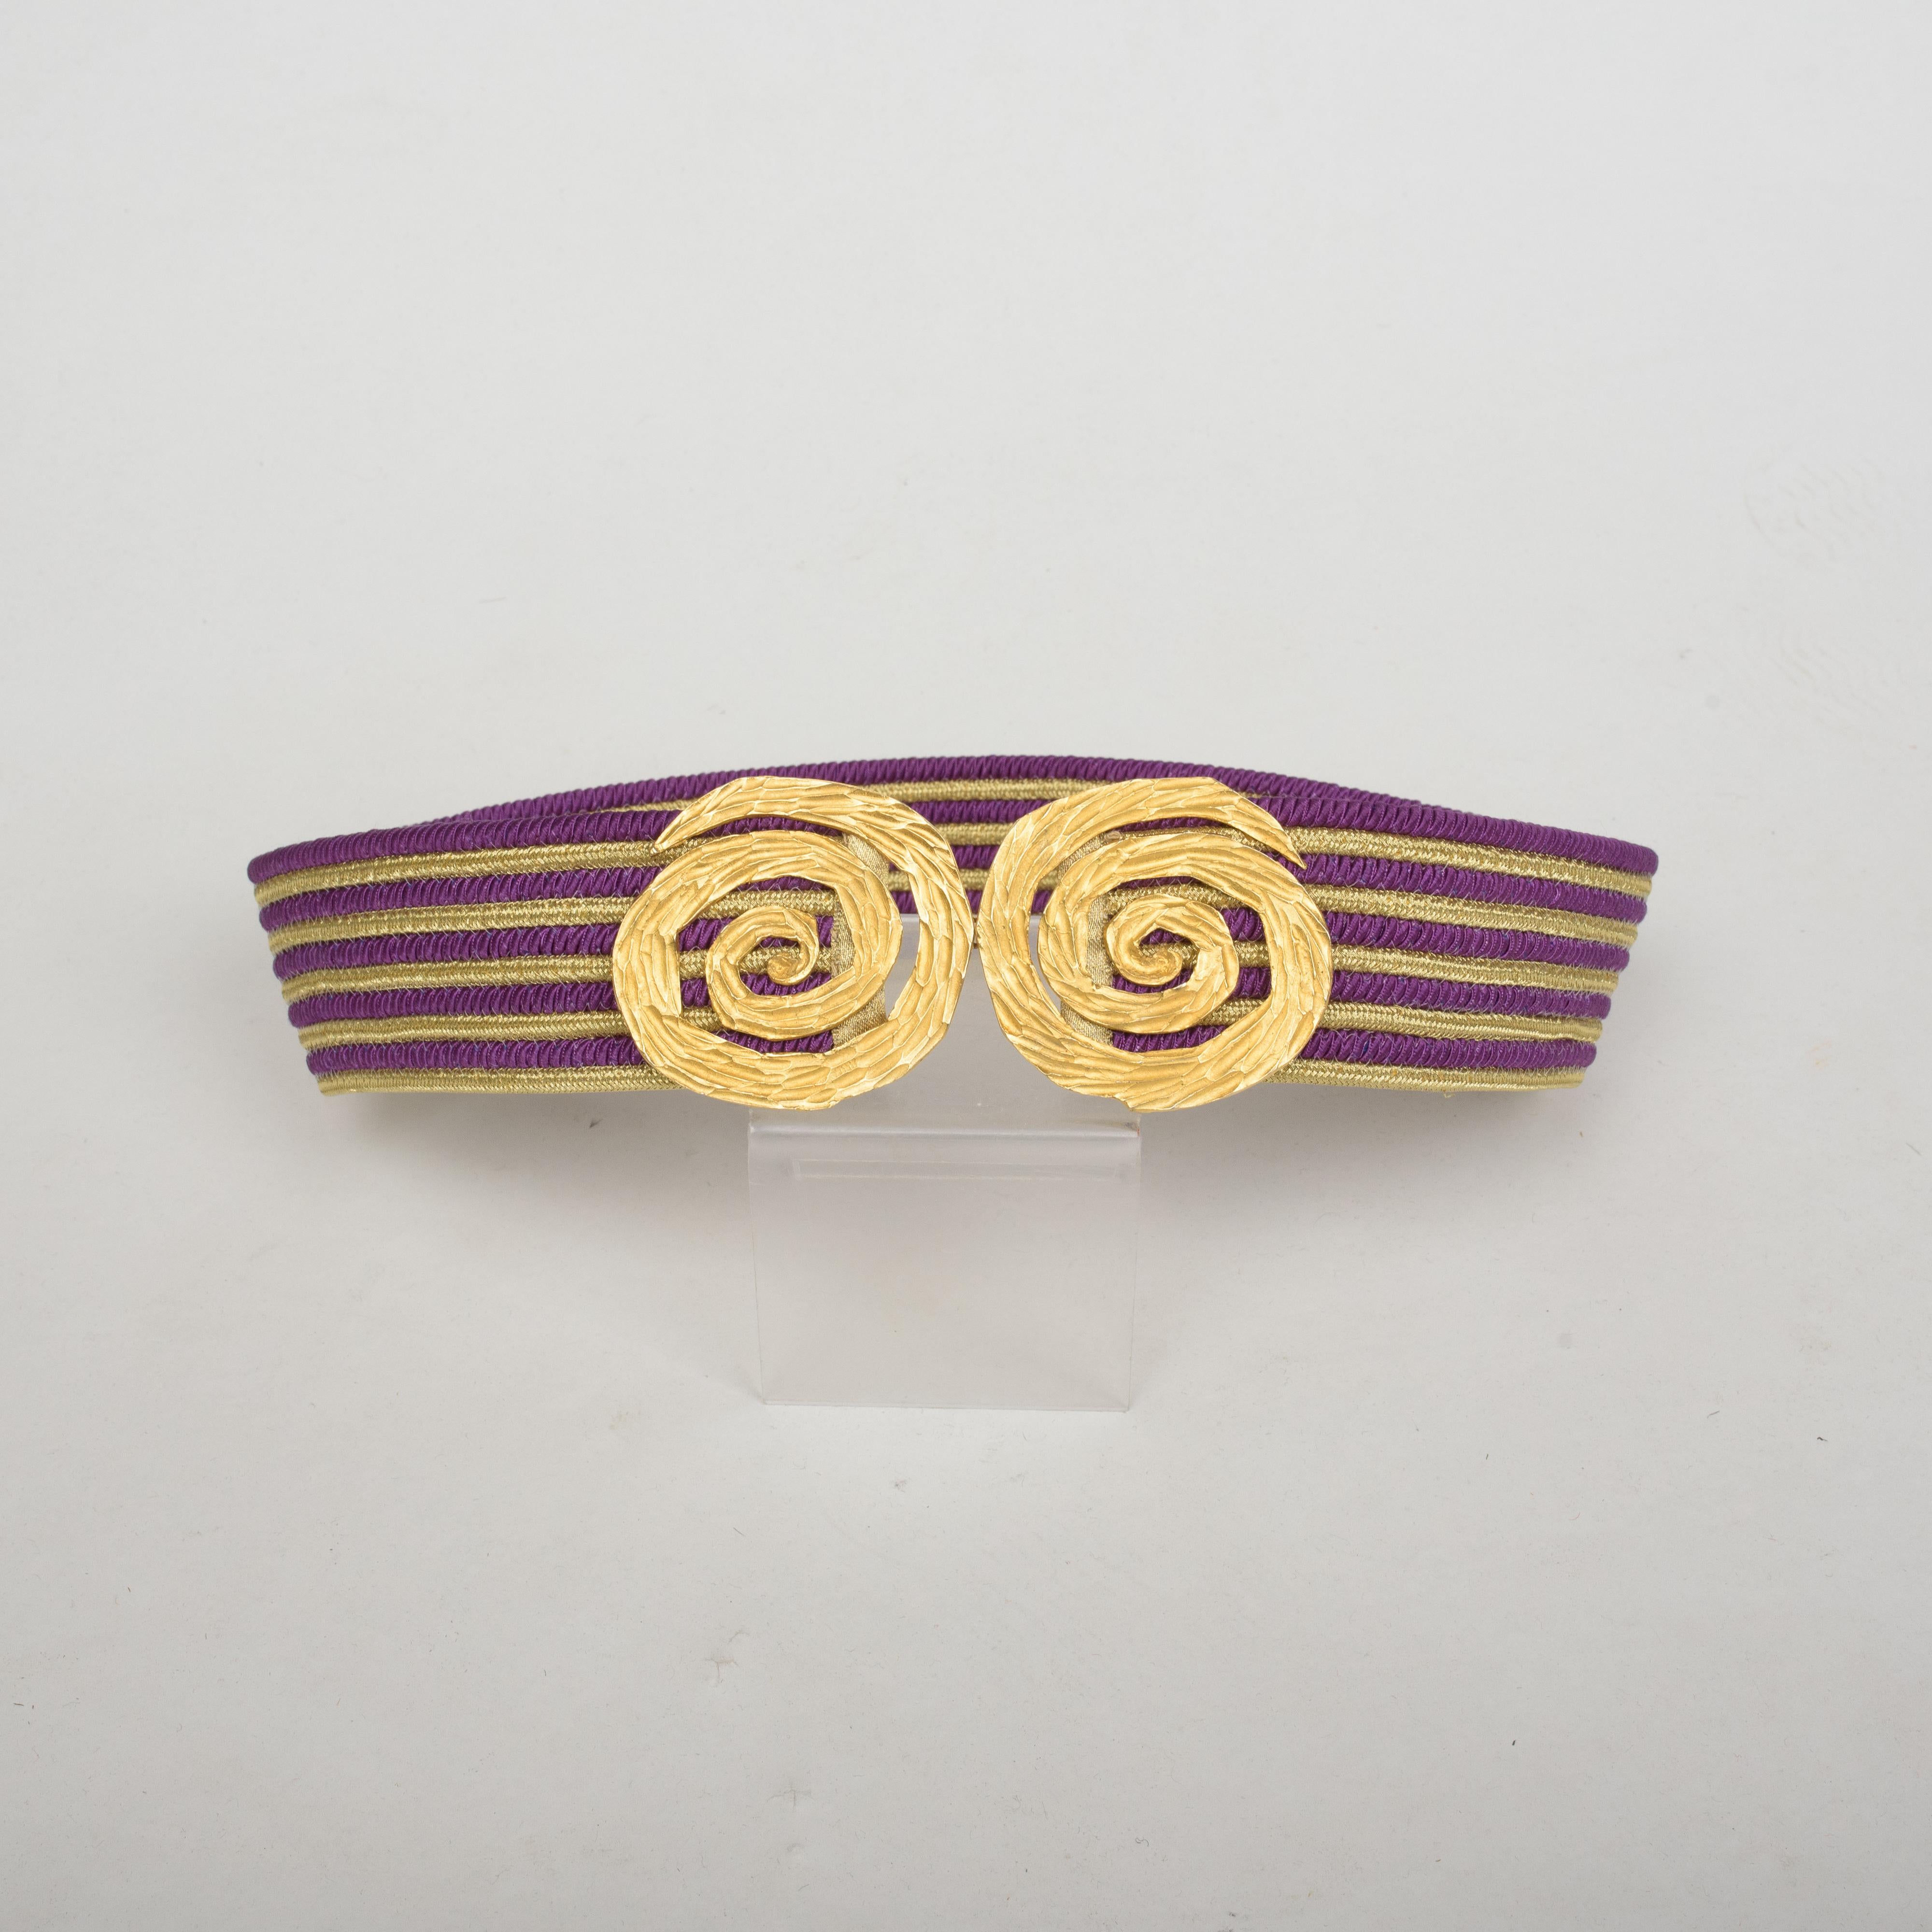 Spring Summer 1991 collection

France

Beautiful collection belt signed Yves Saint Laurent Rive Gauche by the famous parurier Robert Goossens dating from the Spring Summer 1991 collection. Large belt in purple silk trimmings and golden lurex. A